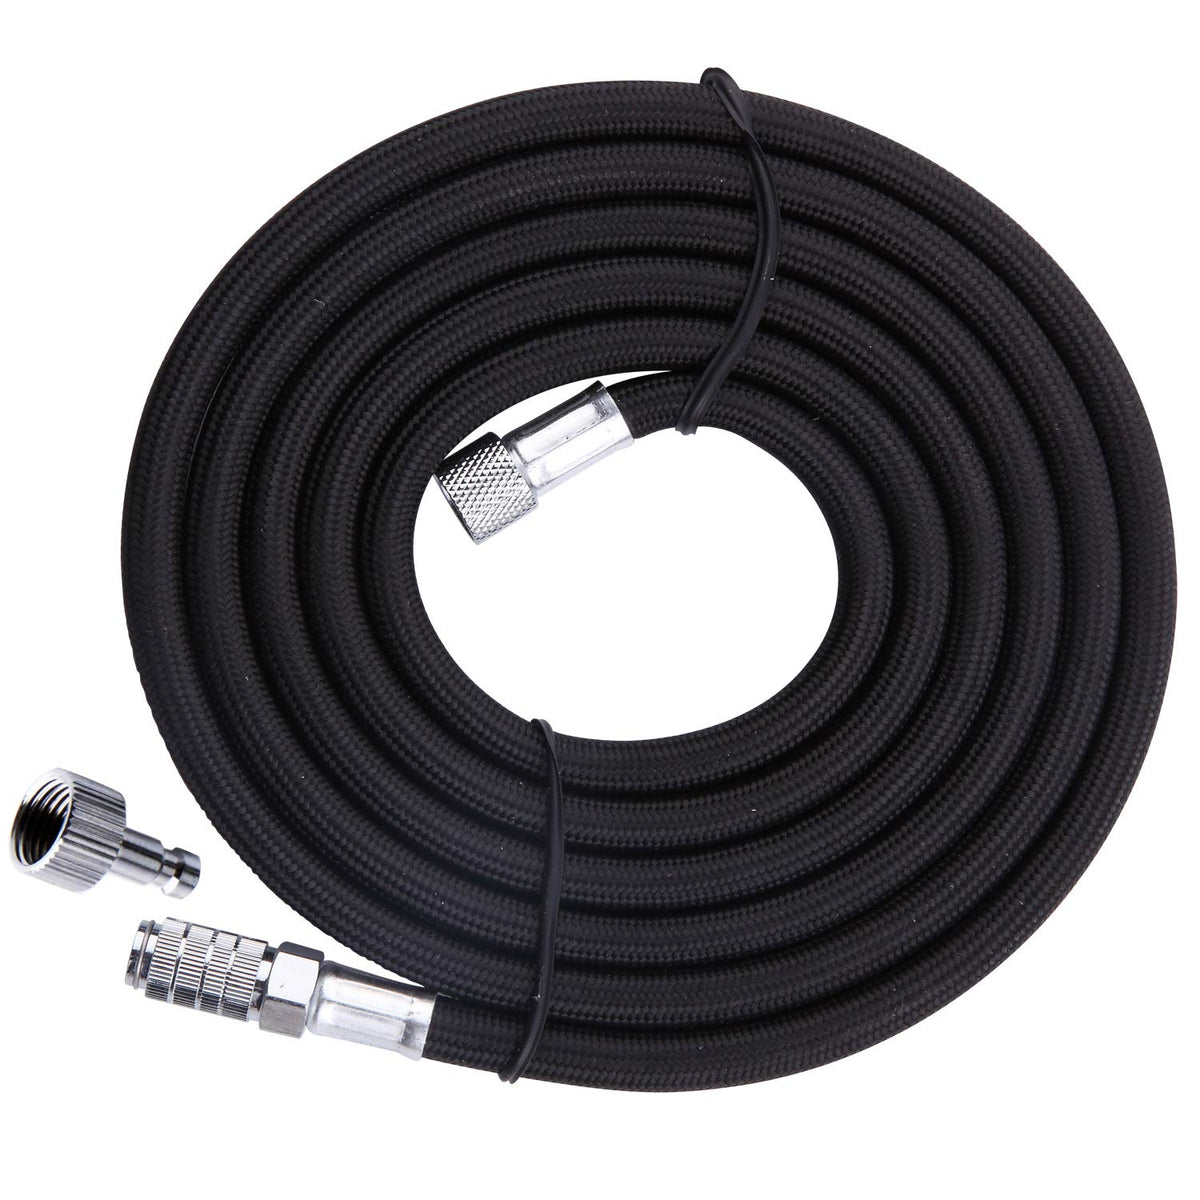 10' BRAIDED AIRBRUSH HOSE 1/8 Fitting Ends Coupling Fit Iwata Master  Compressor 